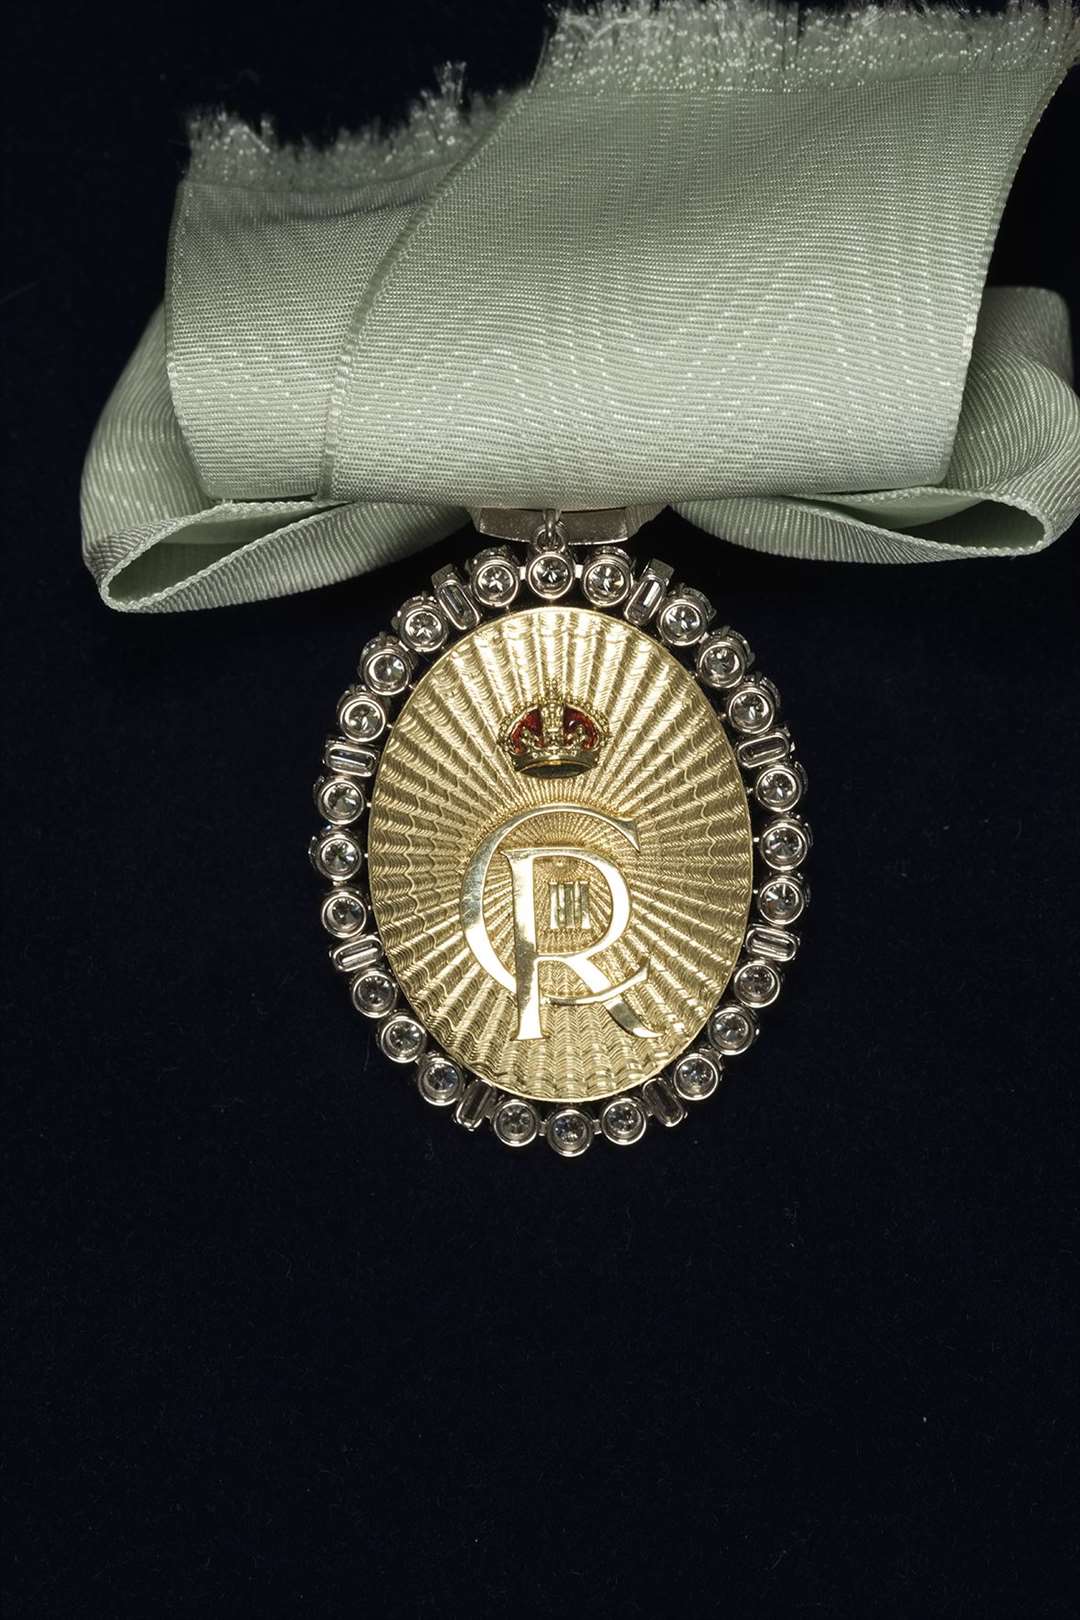 The reverse of the King’s Family Order worn by the Queen for the first time (Buckingham Palace/PA)